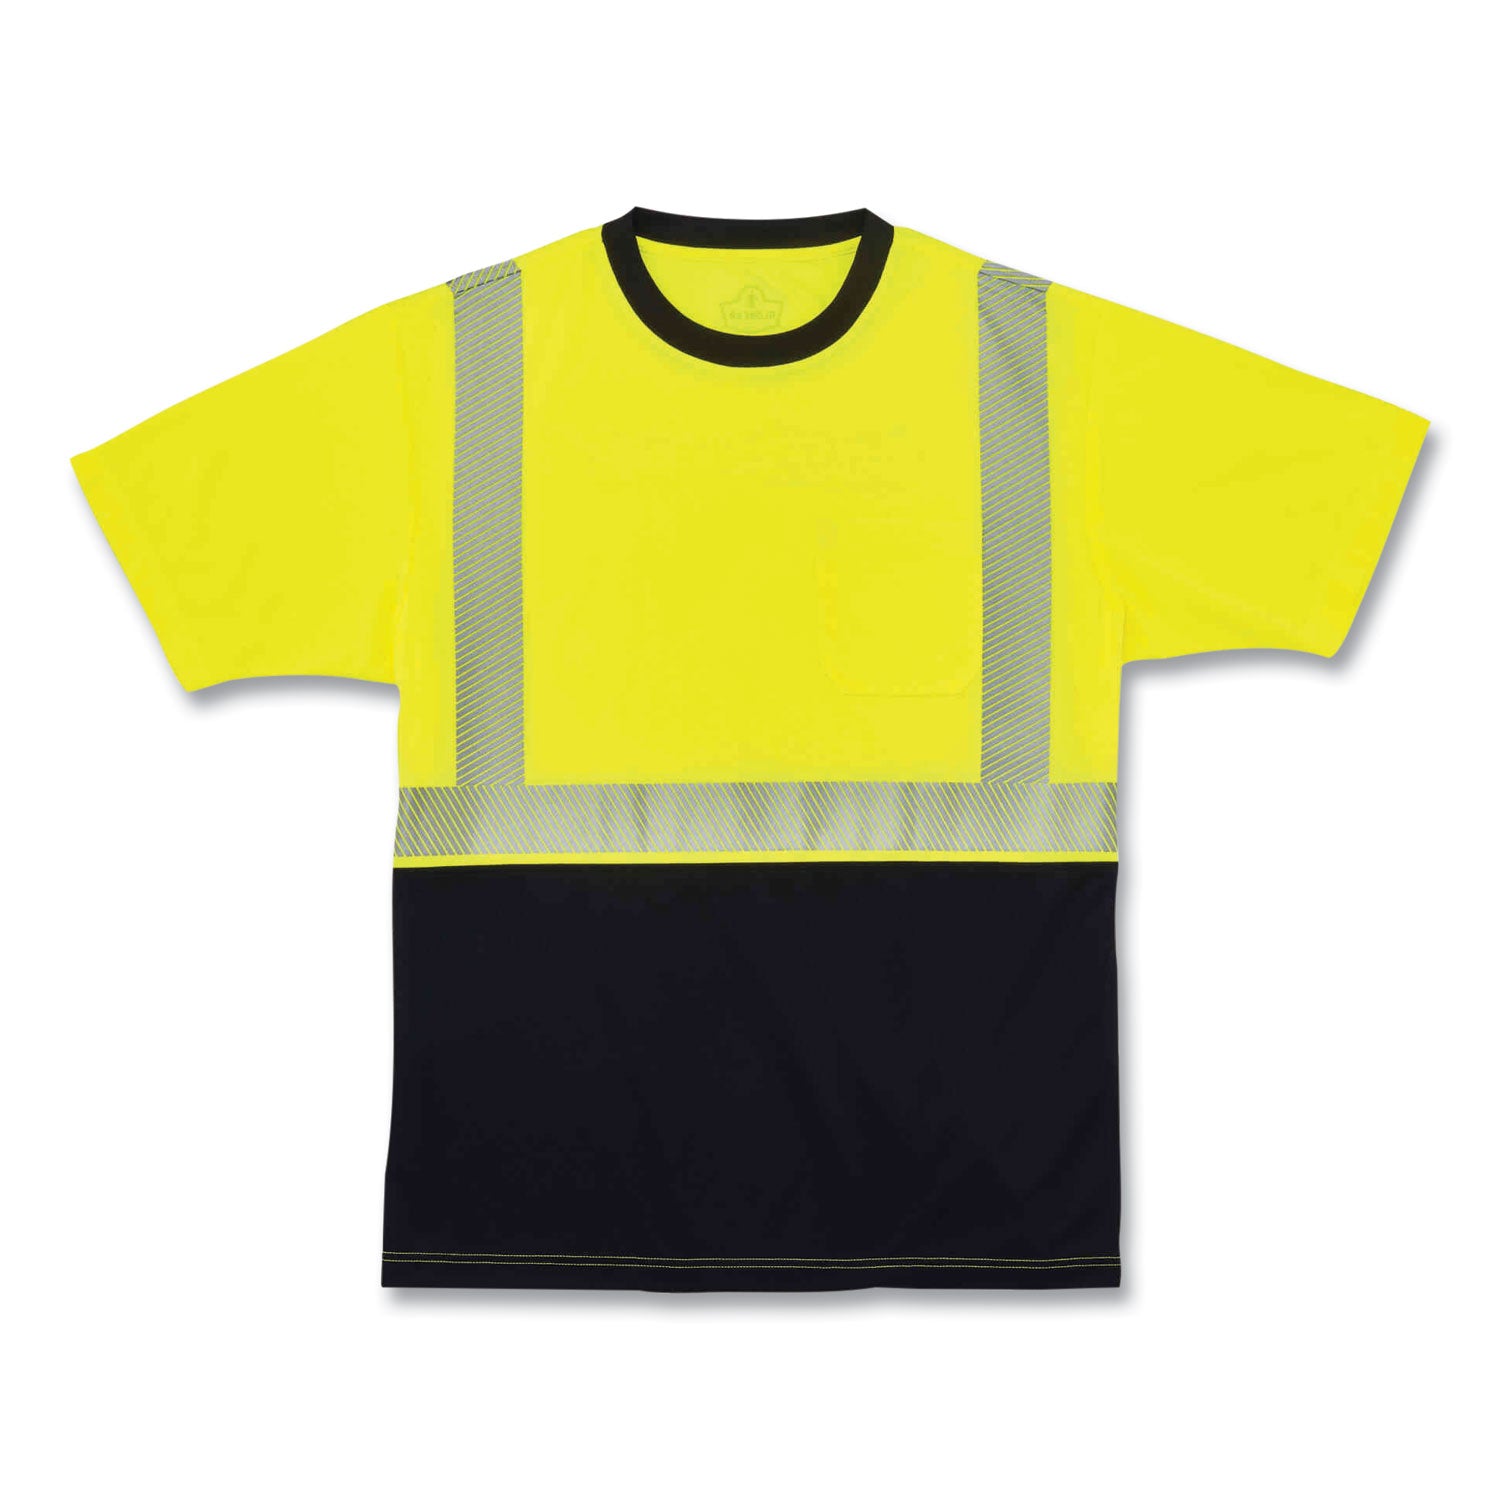 glowear-8280bk-class-2-performance-t-shirt-with-black-bottom-polyester-small-lime-ships-in-1-3-business-days_ego22532 - 1